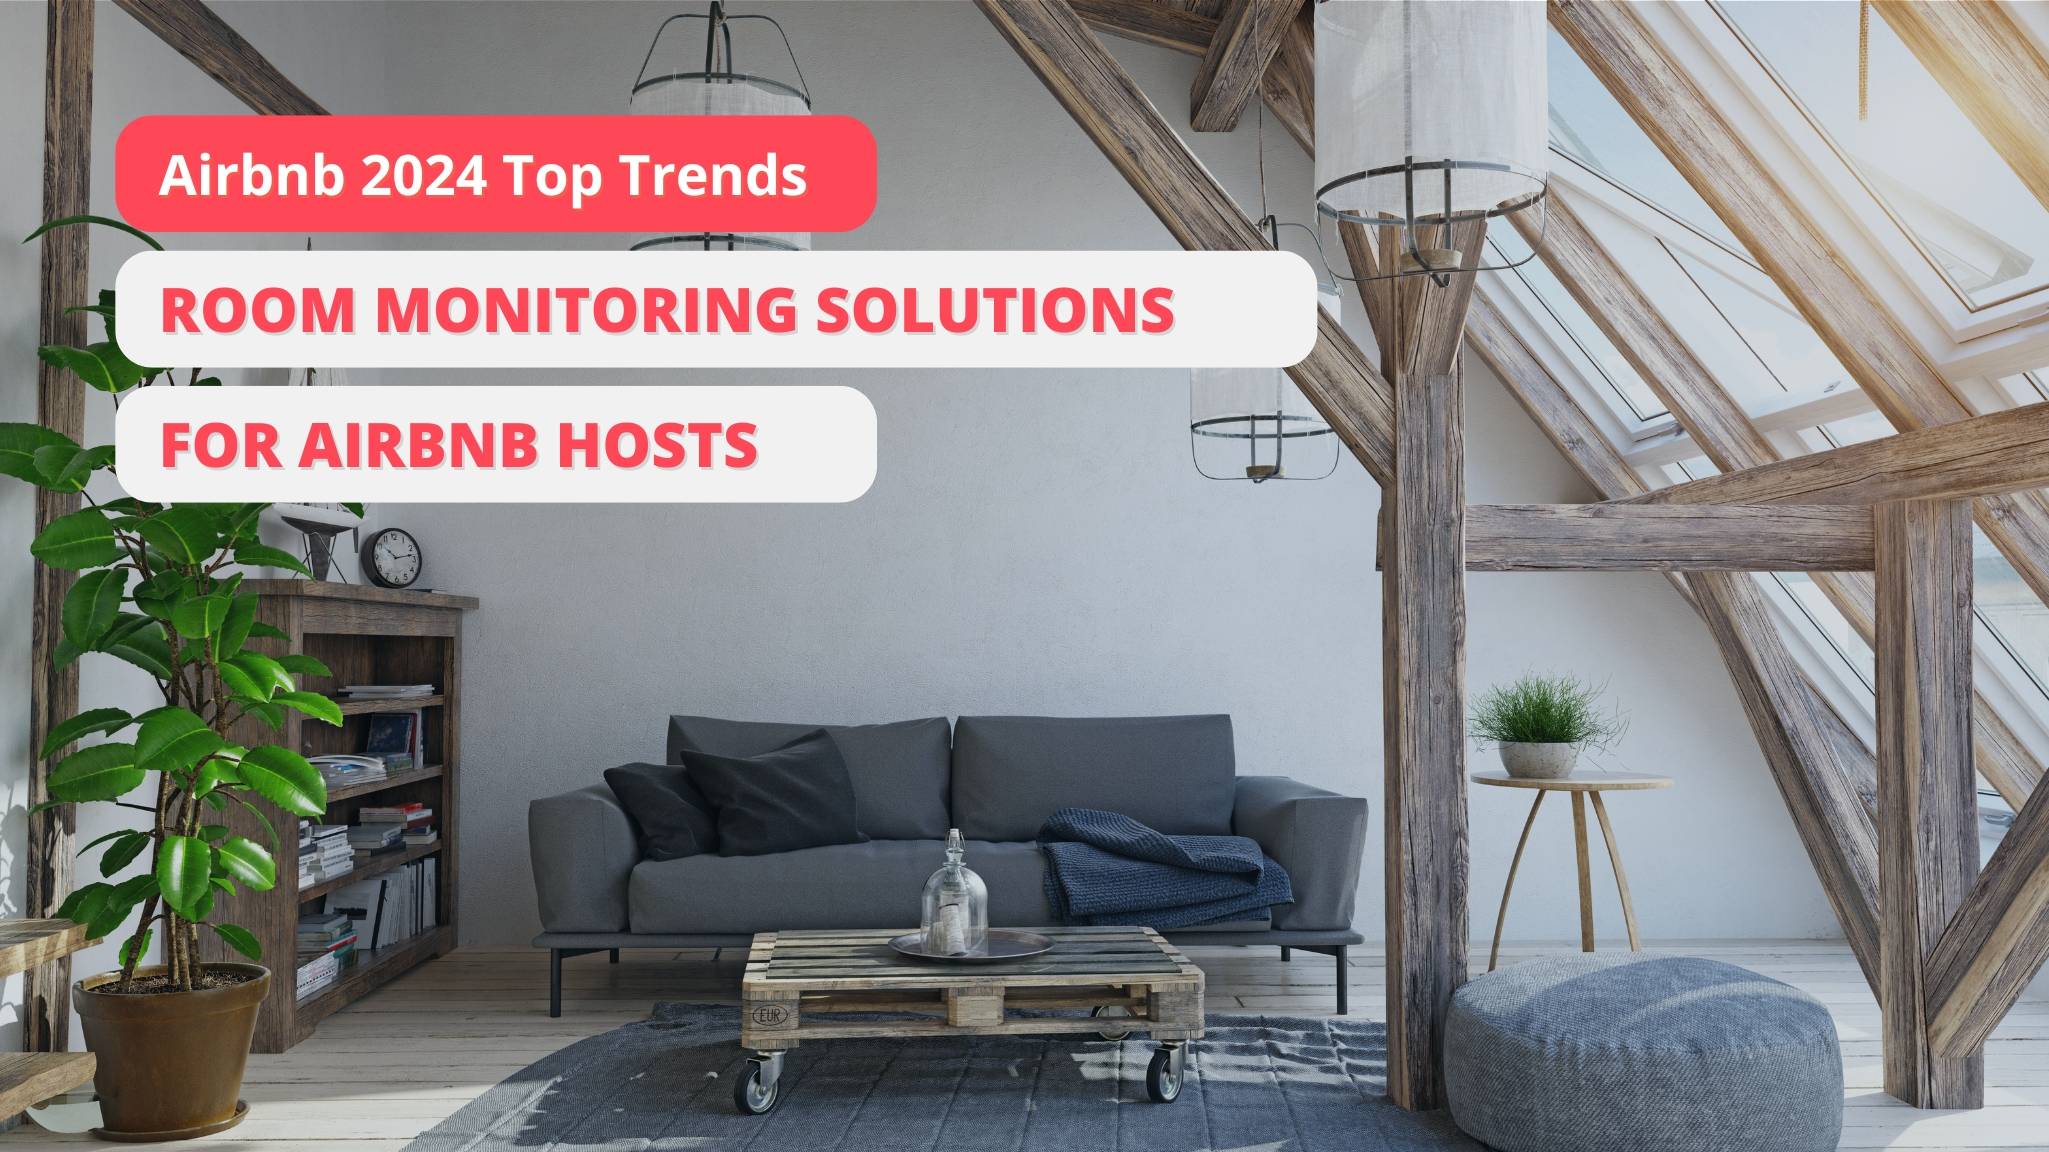 Airbnb 2024 Top Trends Room Monitoring Solutions for Airbnb Hosts